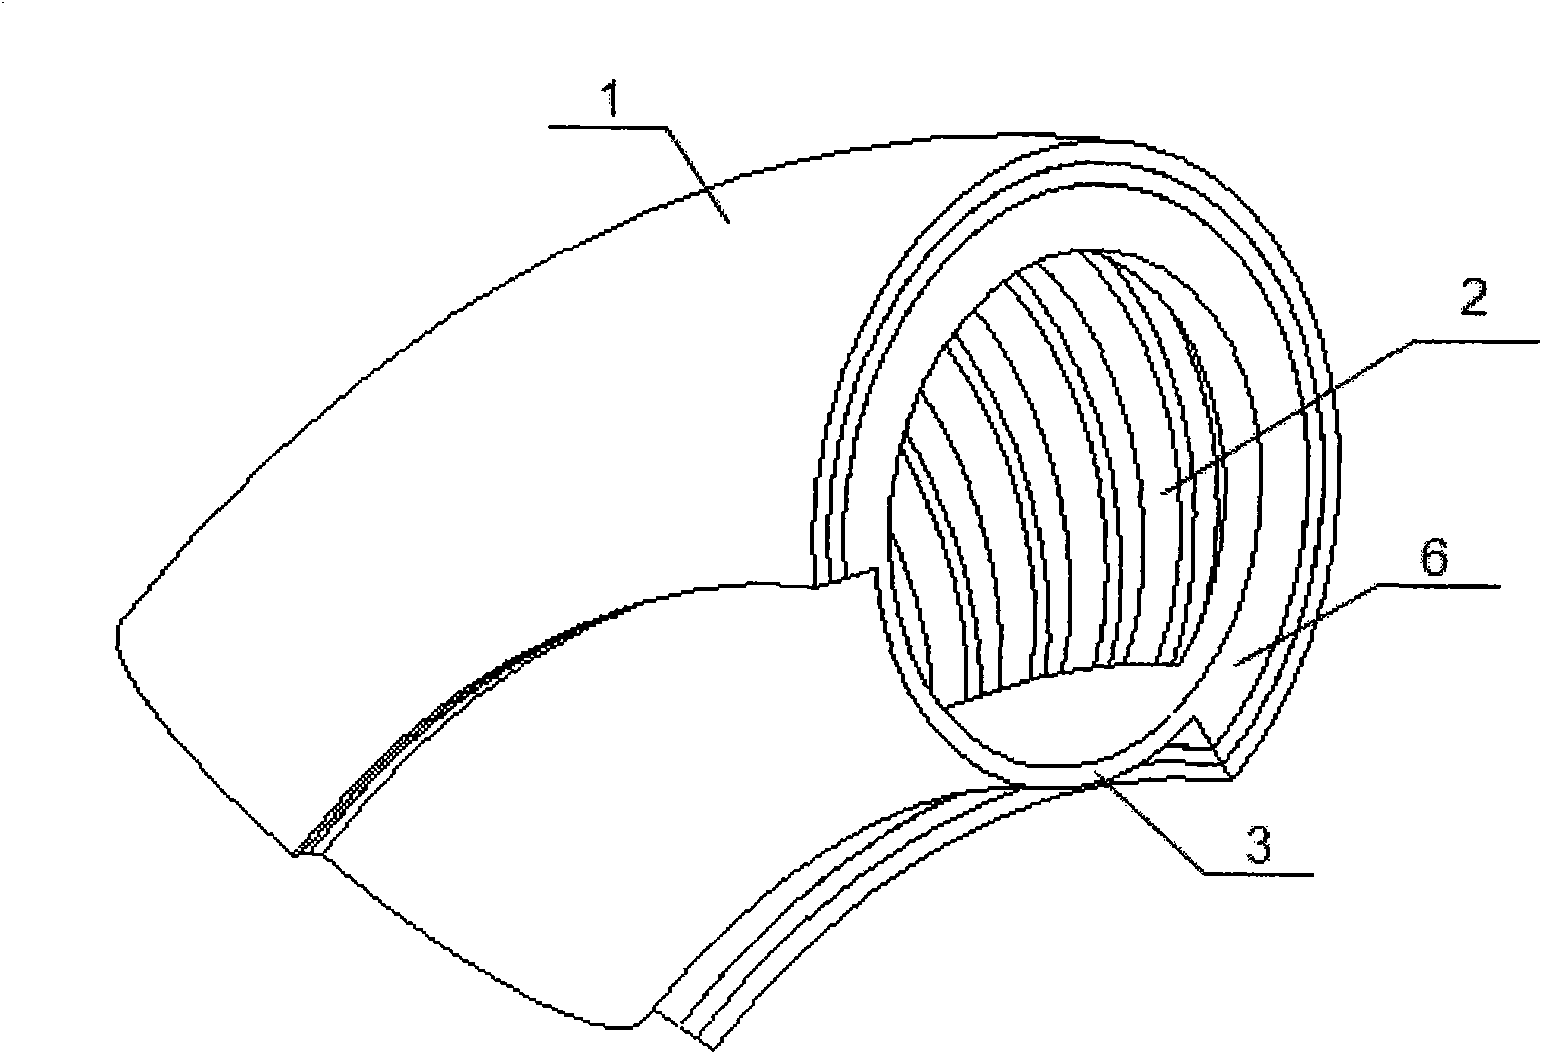 Solid material transporting elbow with detachable and changeable liner